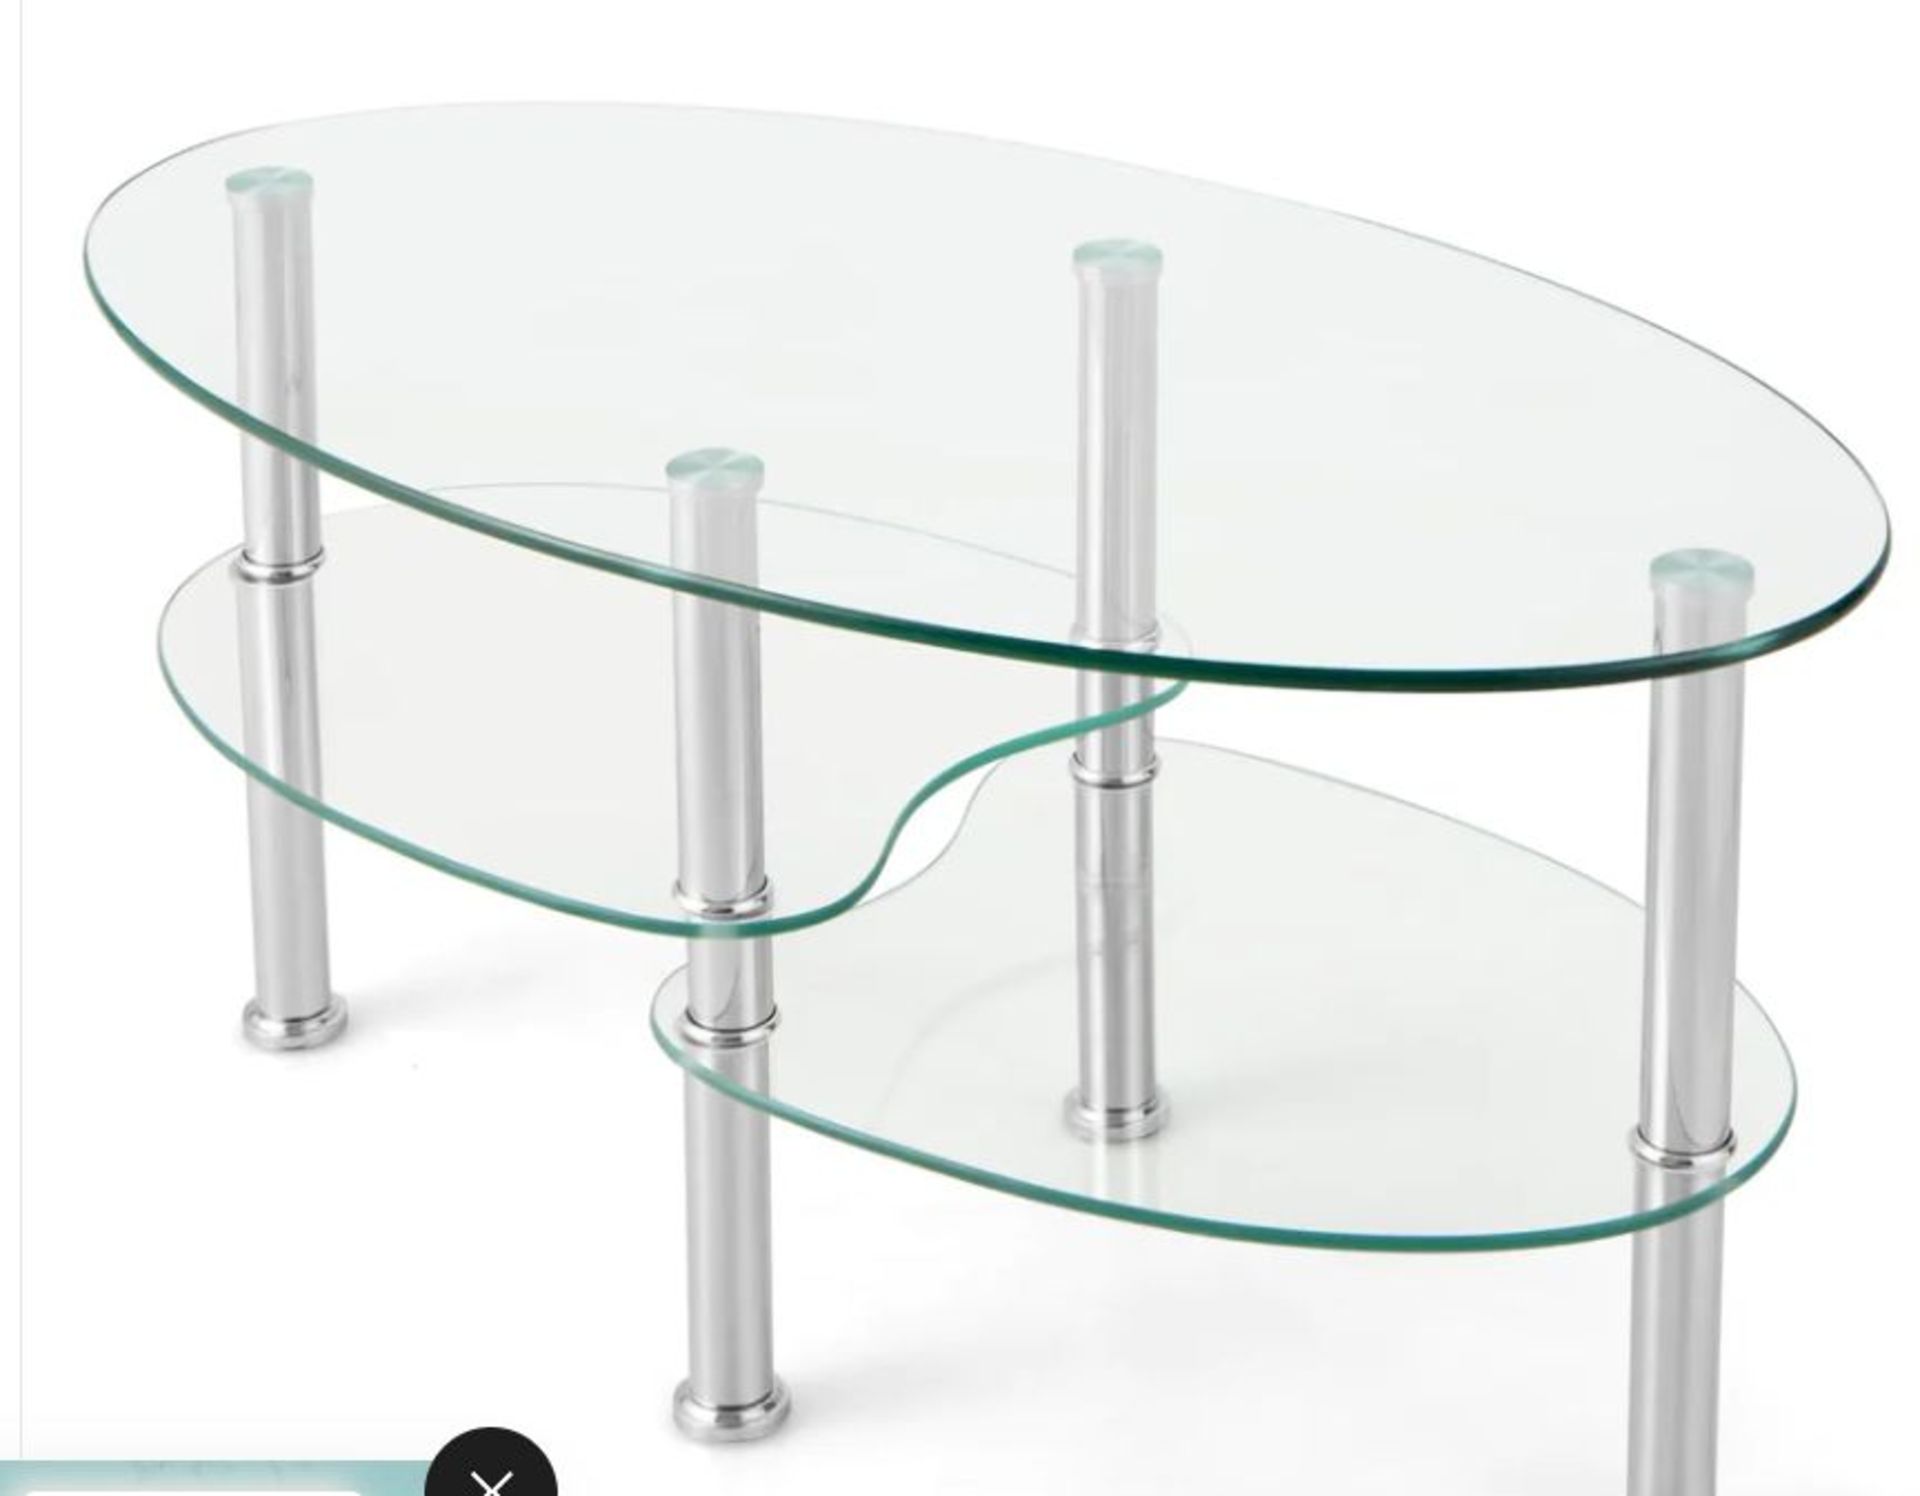 Giantex Oval Glass Coffee Table - 3-Tier Transparent Tempered Glass Center Table with Metal Stand,